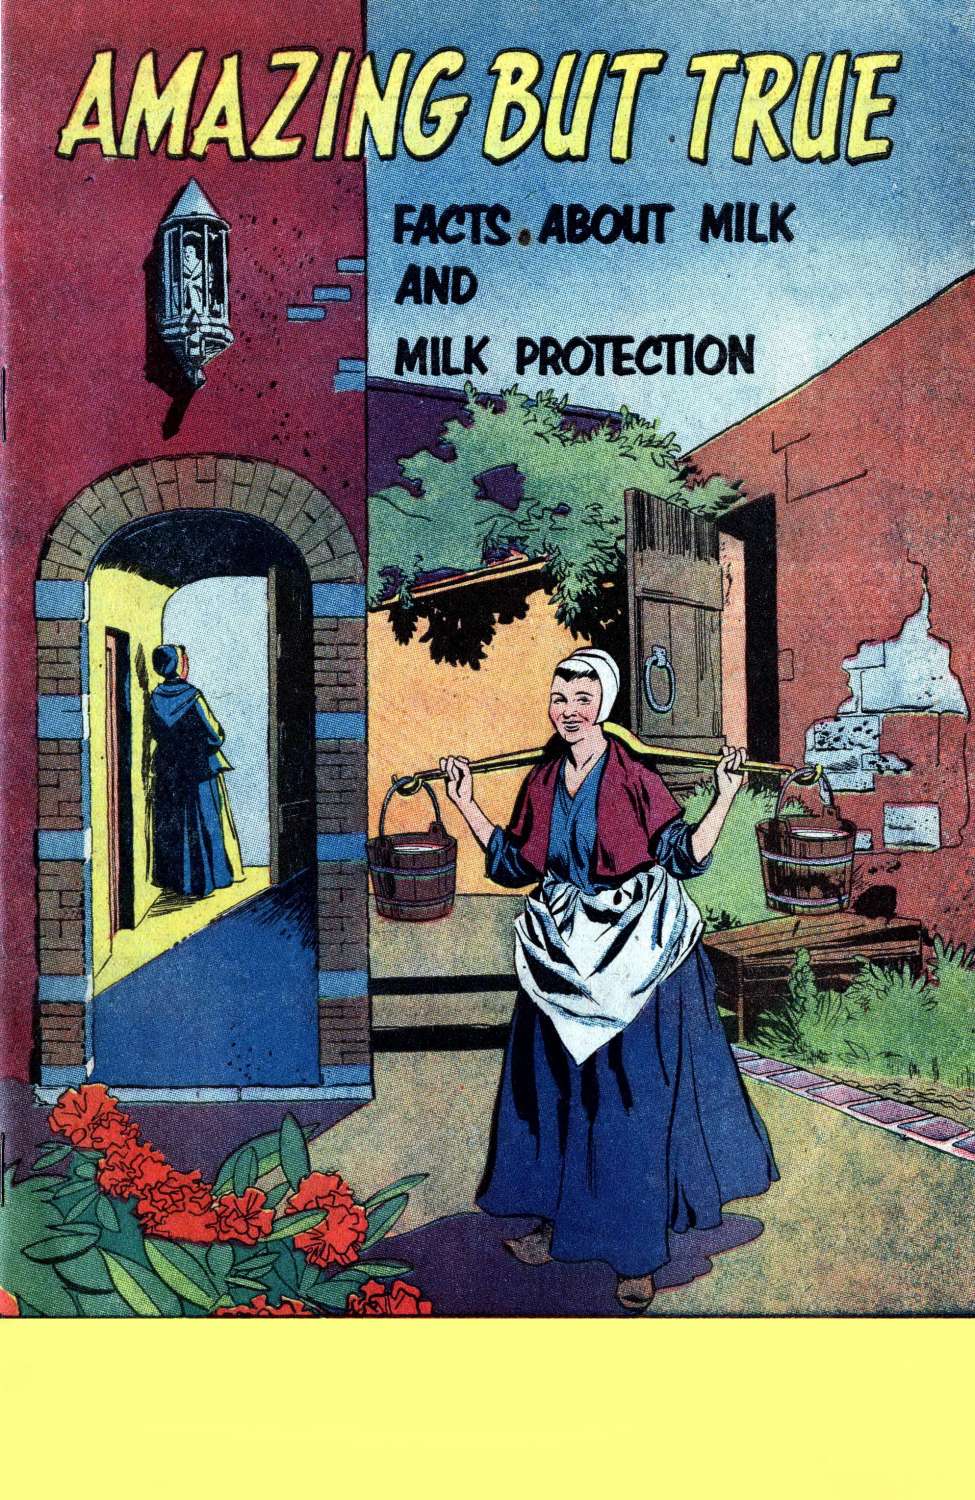 Book Cover For Amazing But True - Facts About Milk and Milk Protection